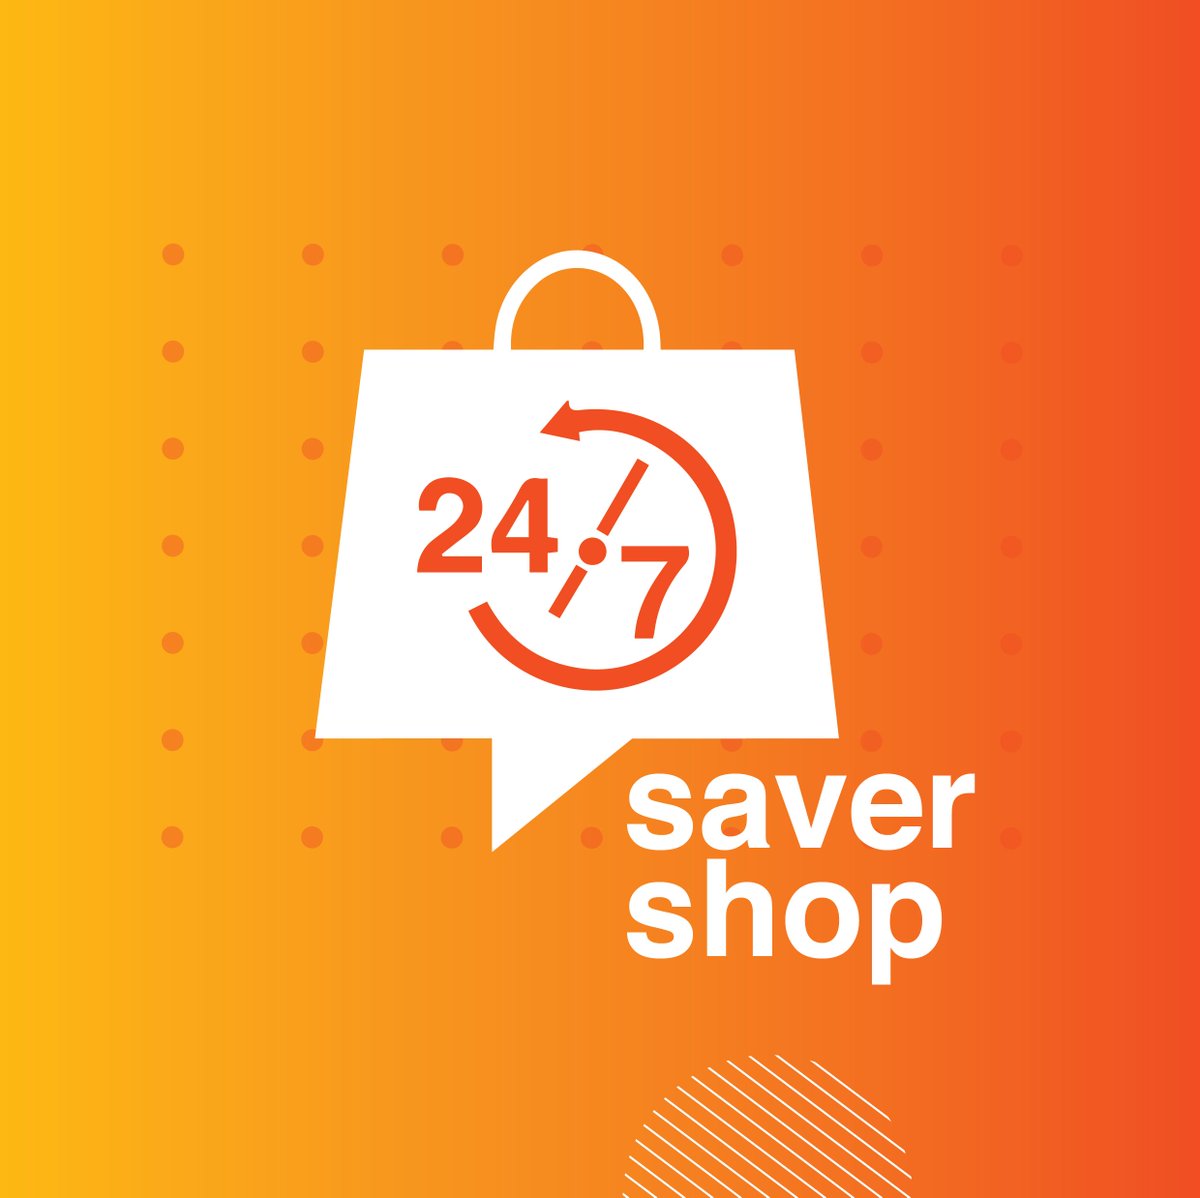 Spend less reaching a large audience each day.
Your 24/7 online saver shop is here. 

#shopnaw #shopnawgh #onlineshopping #onlinesales #shopping #onlineshop #ghanasales #sales #marketing
#onlineboutique #onlinestore #shoppingonline #ecommerce